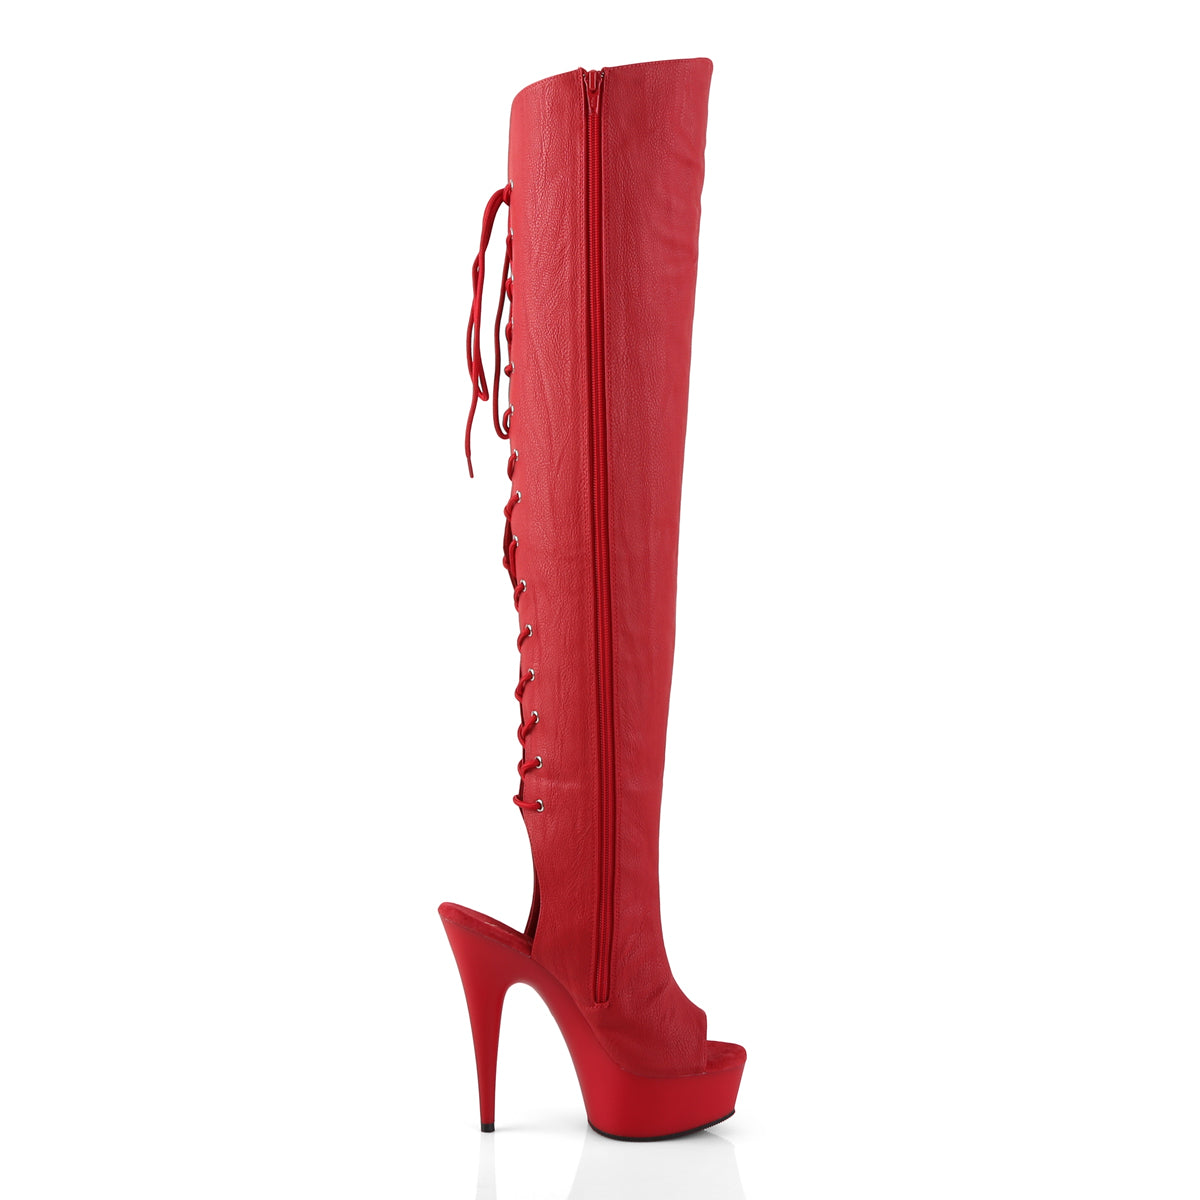 DELIGHT-3019 Red Faux Leather/Red Matte Boot Pleaser